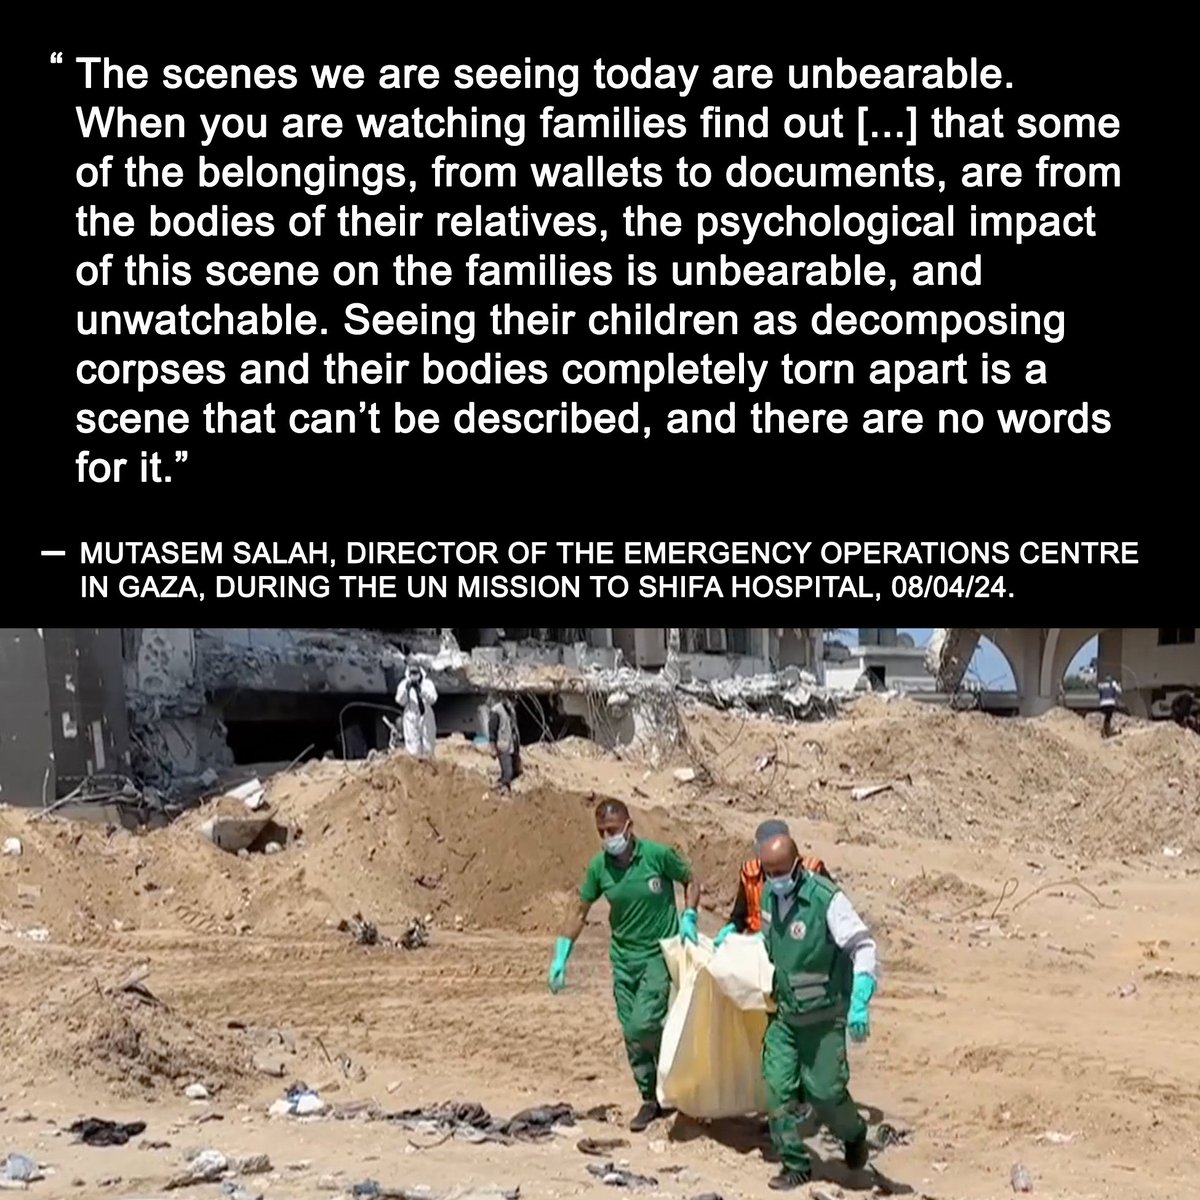 “Seeing their children as decomposing corpses and their bodies completely torn apart is a scene that can’t be described”. Haunting words from one of the UN team visiting Shifa hospital to support the identification of the remains of the people killed there during Israel’s raid.